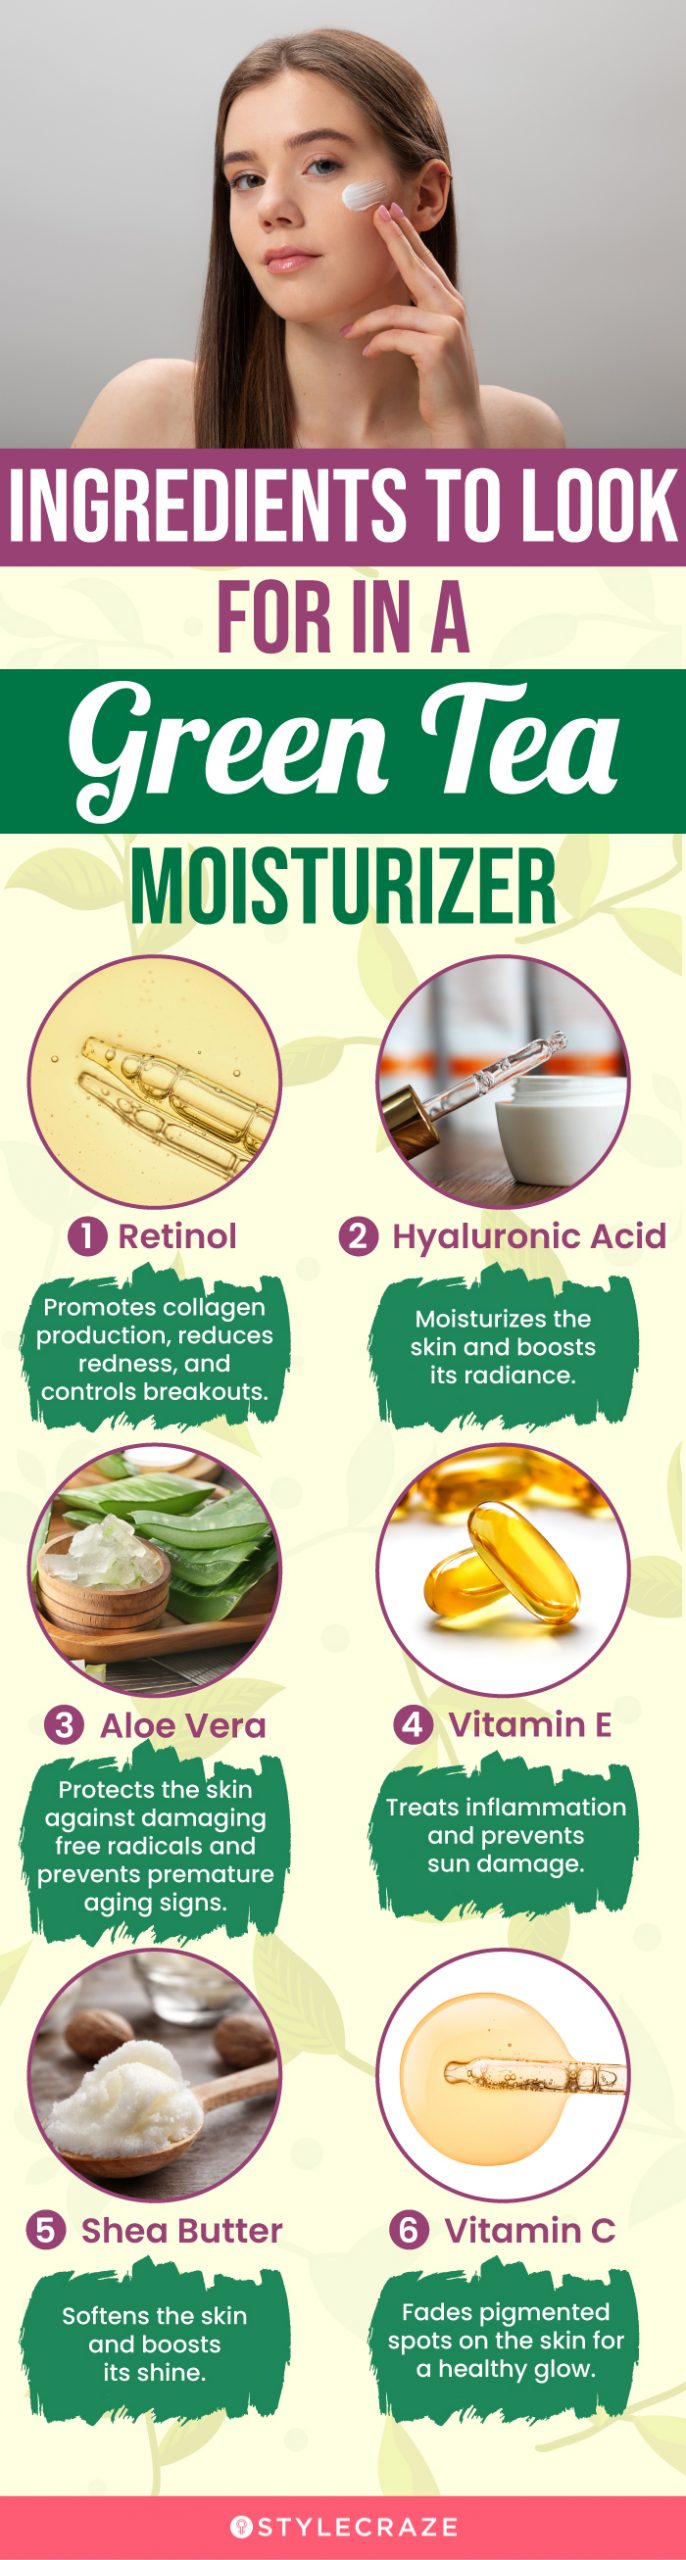 Ingredients To Look For In A Green Tea Moisturizer (infographic)